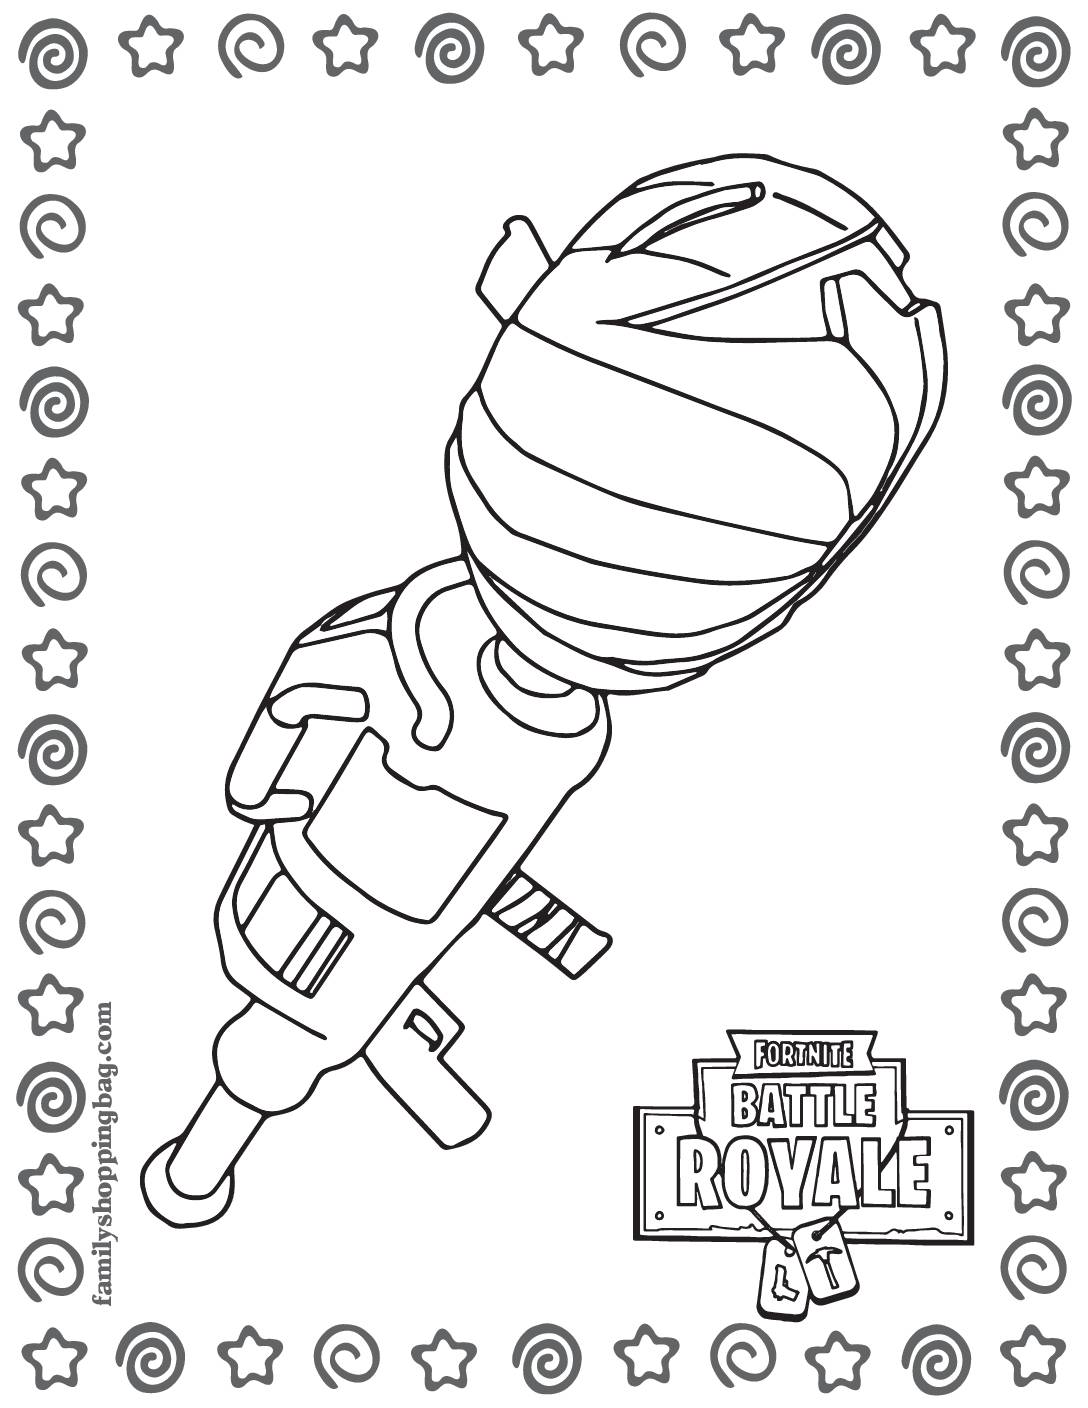 Coloring Page 2 Fortnite Coloring Pages